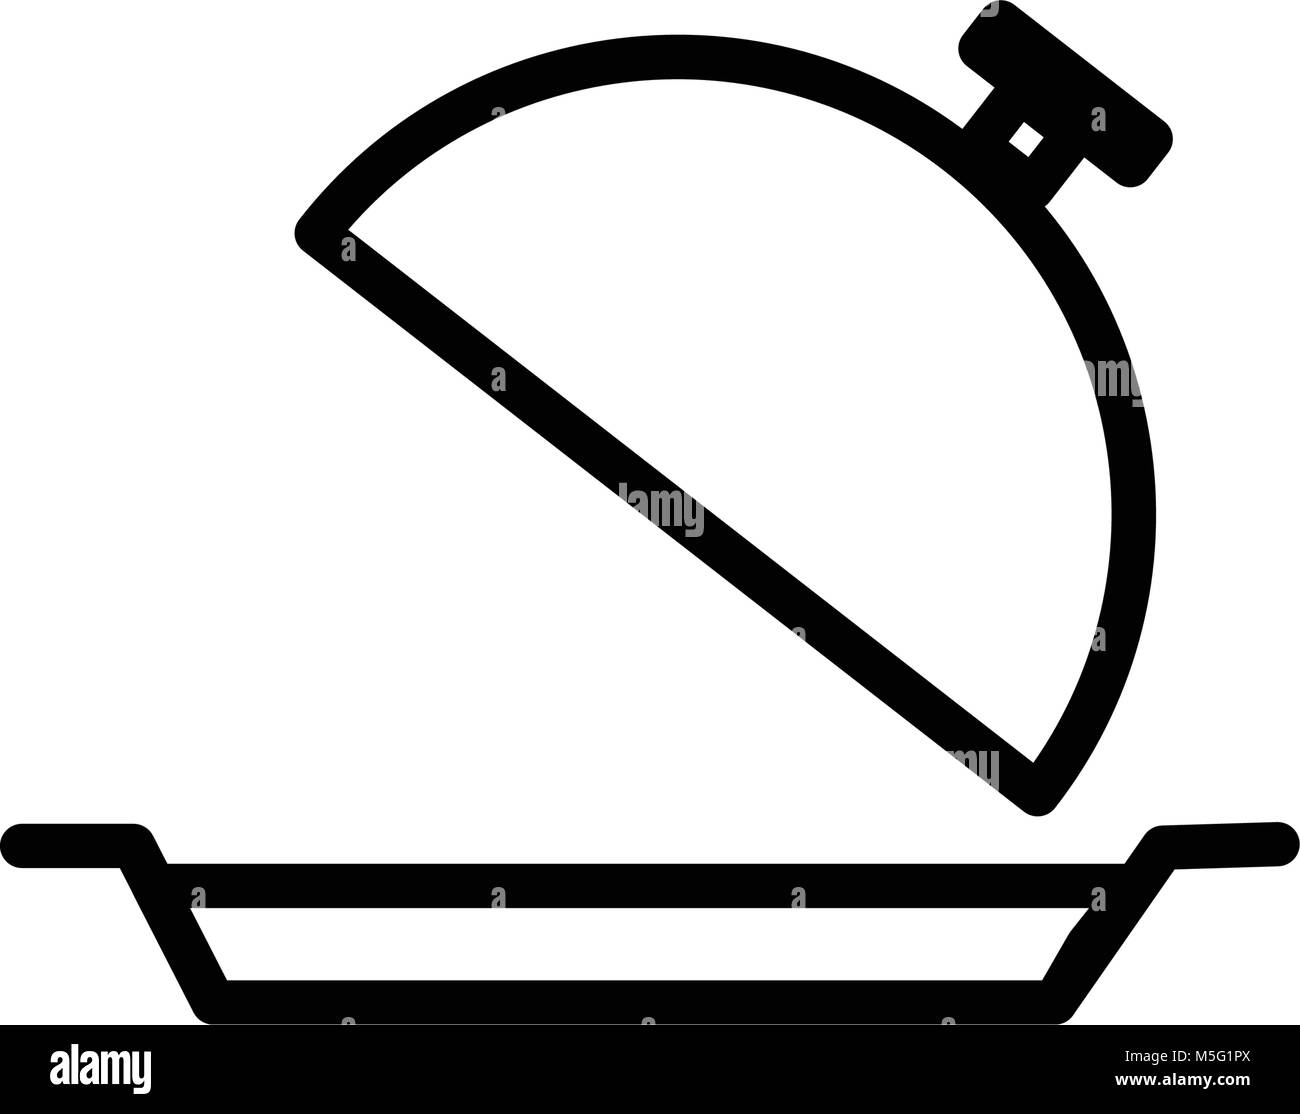 Tray symbol. meal line icon, Outline and filled vector sign, linear and full pictogram isolated on white, logo illustration Stock Vector